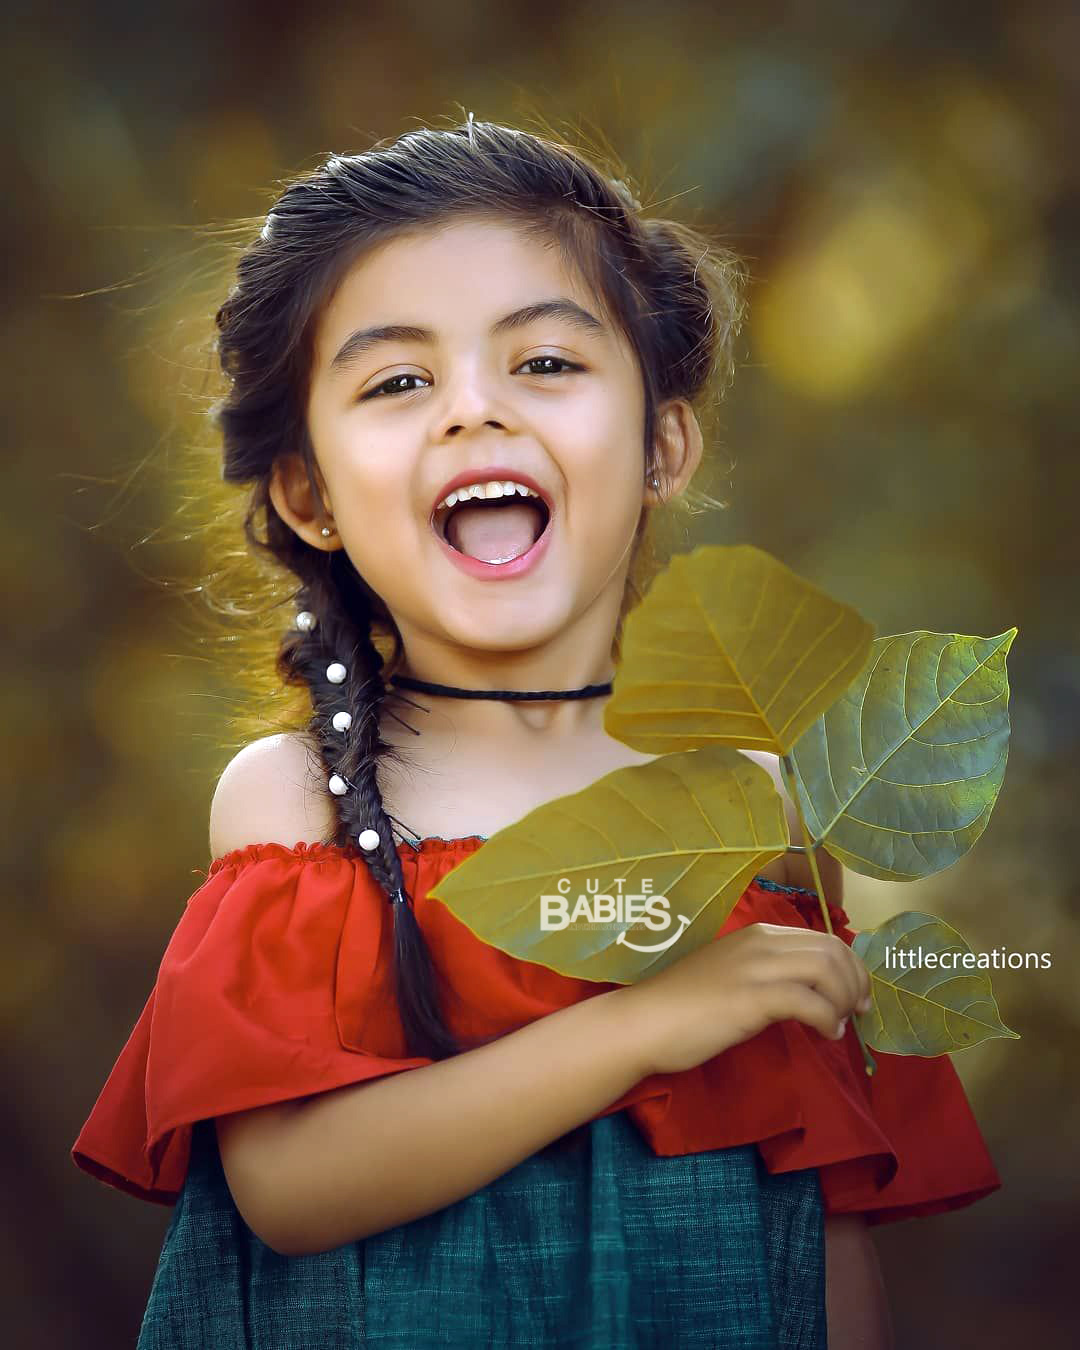 Some Cute Indian Baby Girls 15 Image Baby Smiles